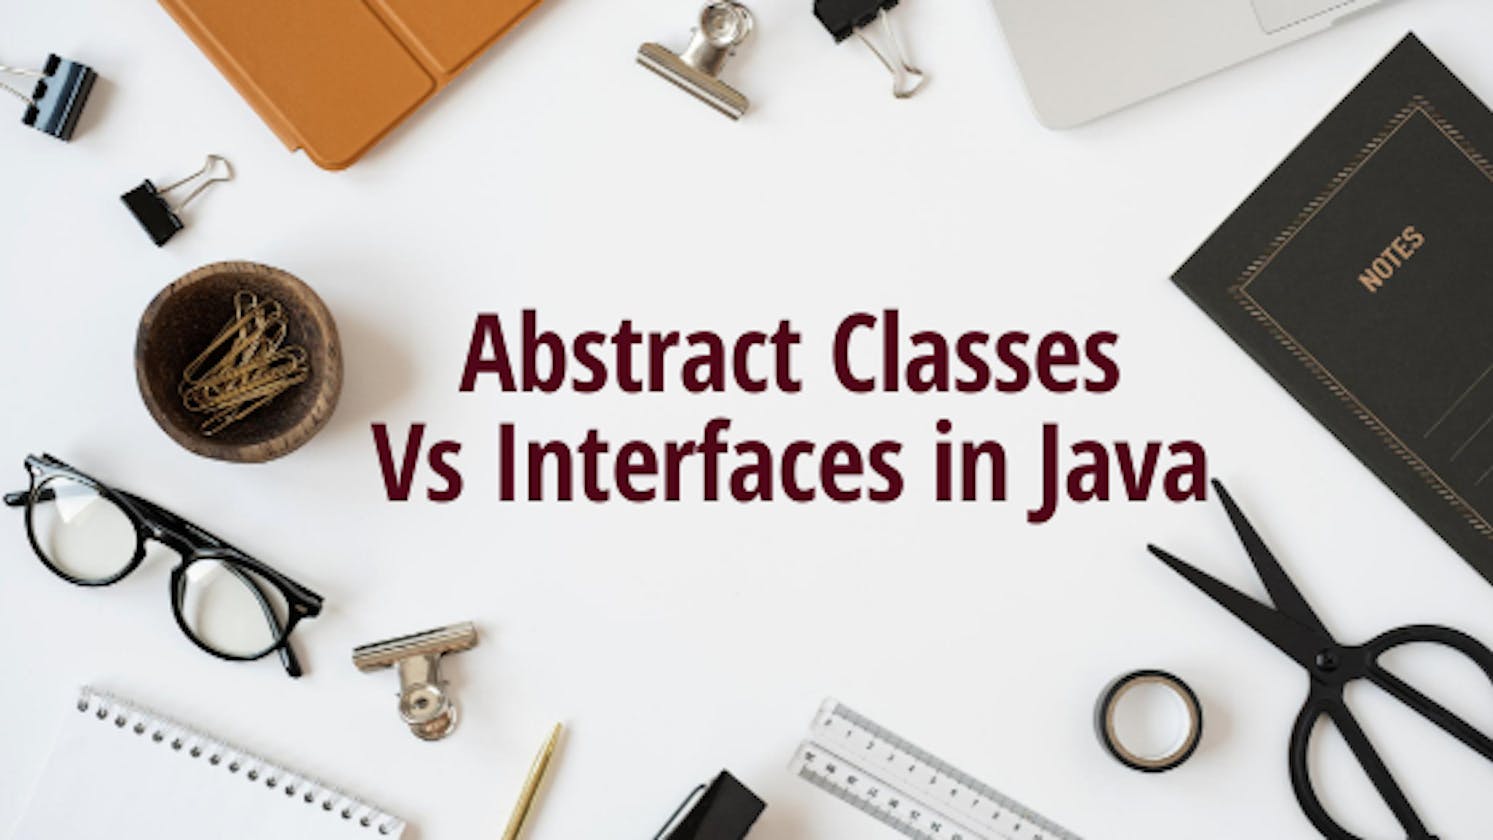 Abstract Classes Vs Interfaces in Java: When to use What?